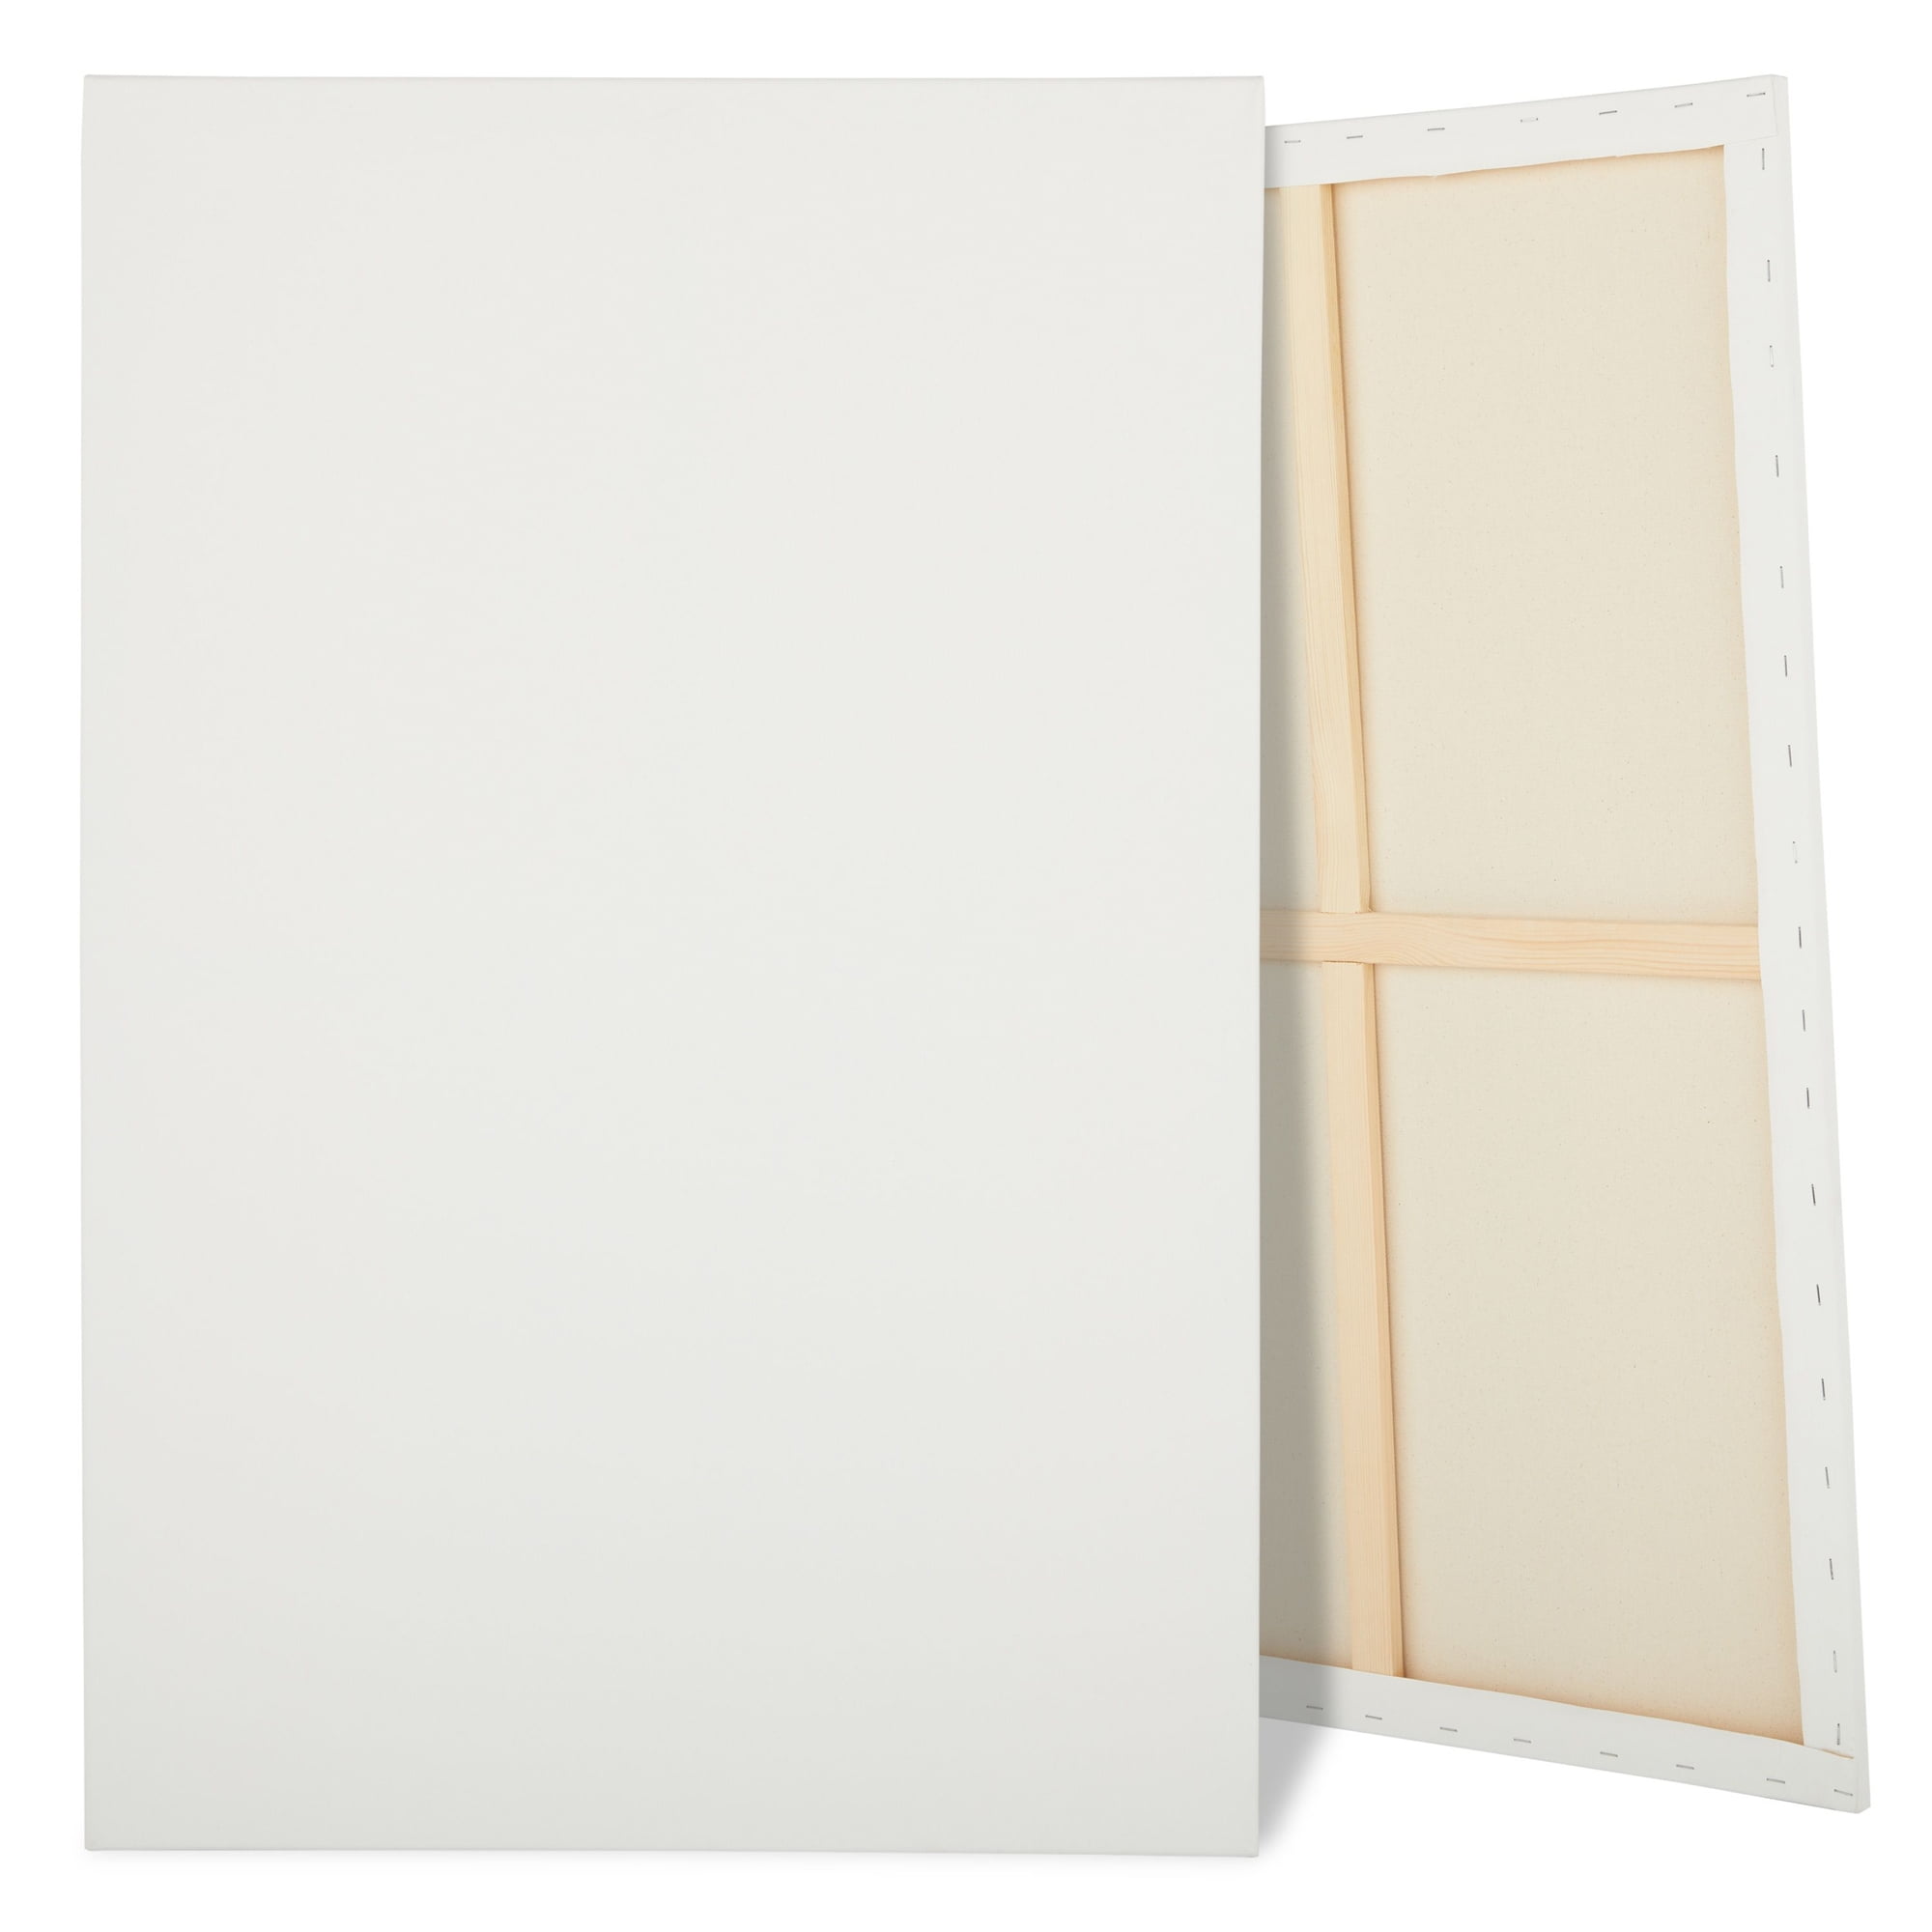 2 Pack Stretched White Canvas Boards for Painting for Acrylic, Oil Paints  36x48